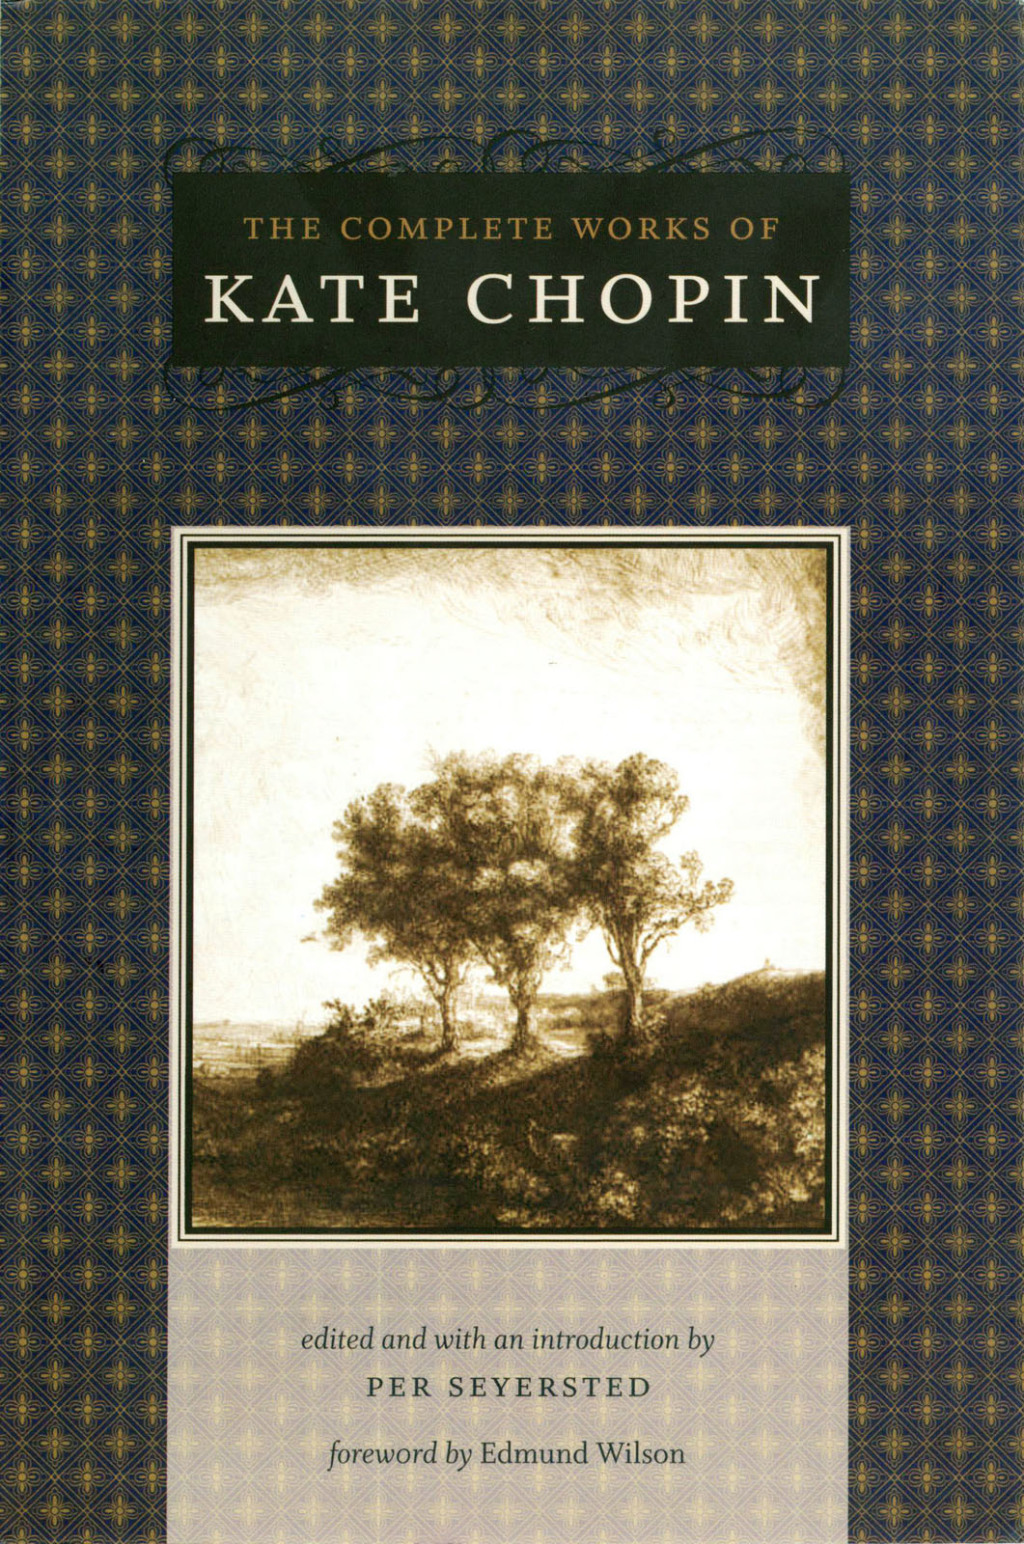 The Complete Works of Kate Chopin (eBook) - Kate Chopin,